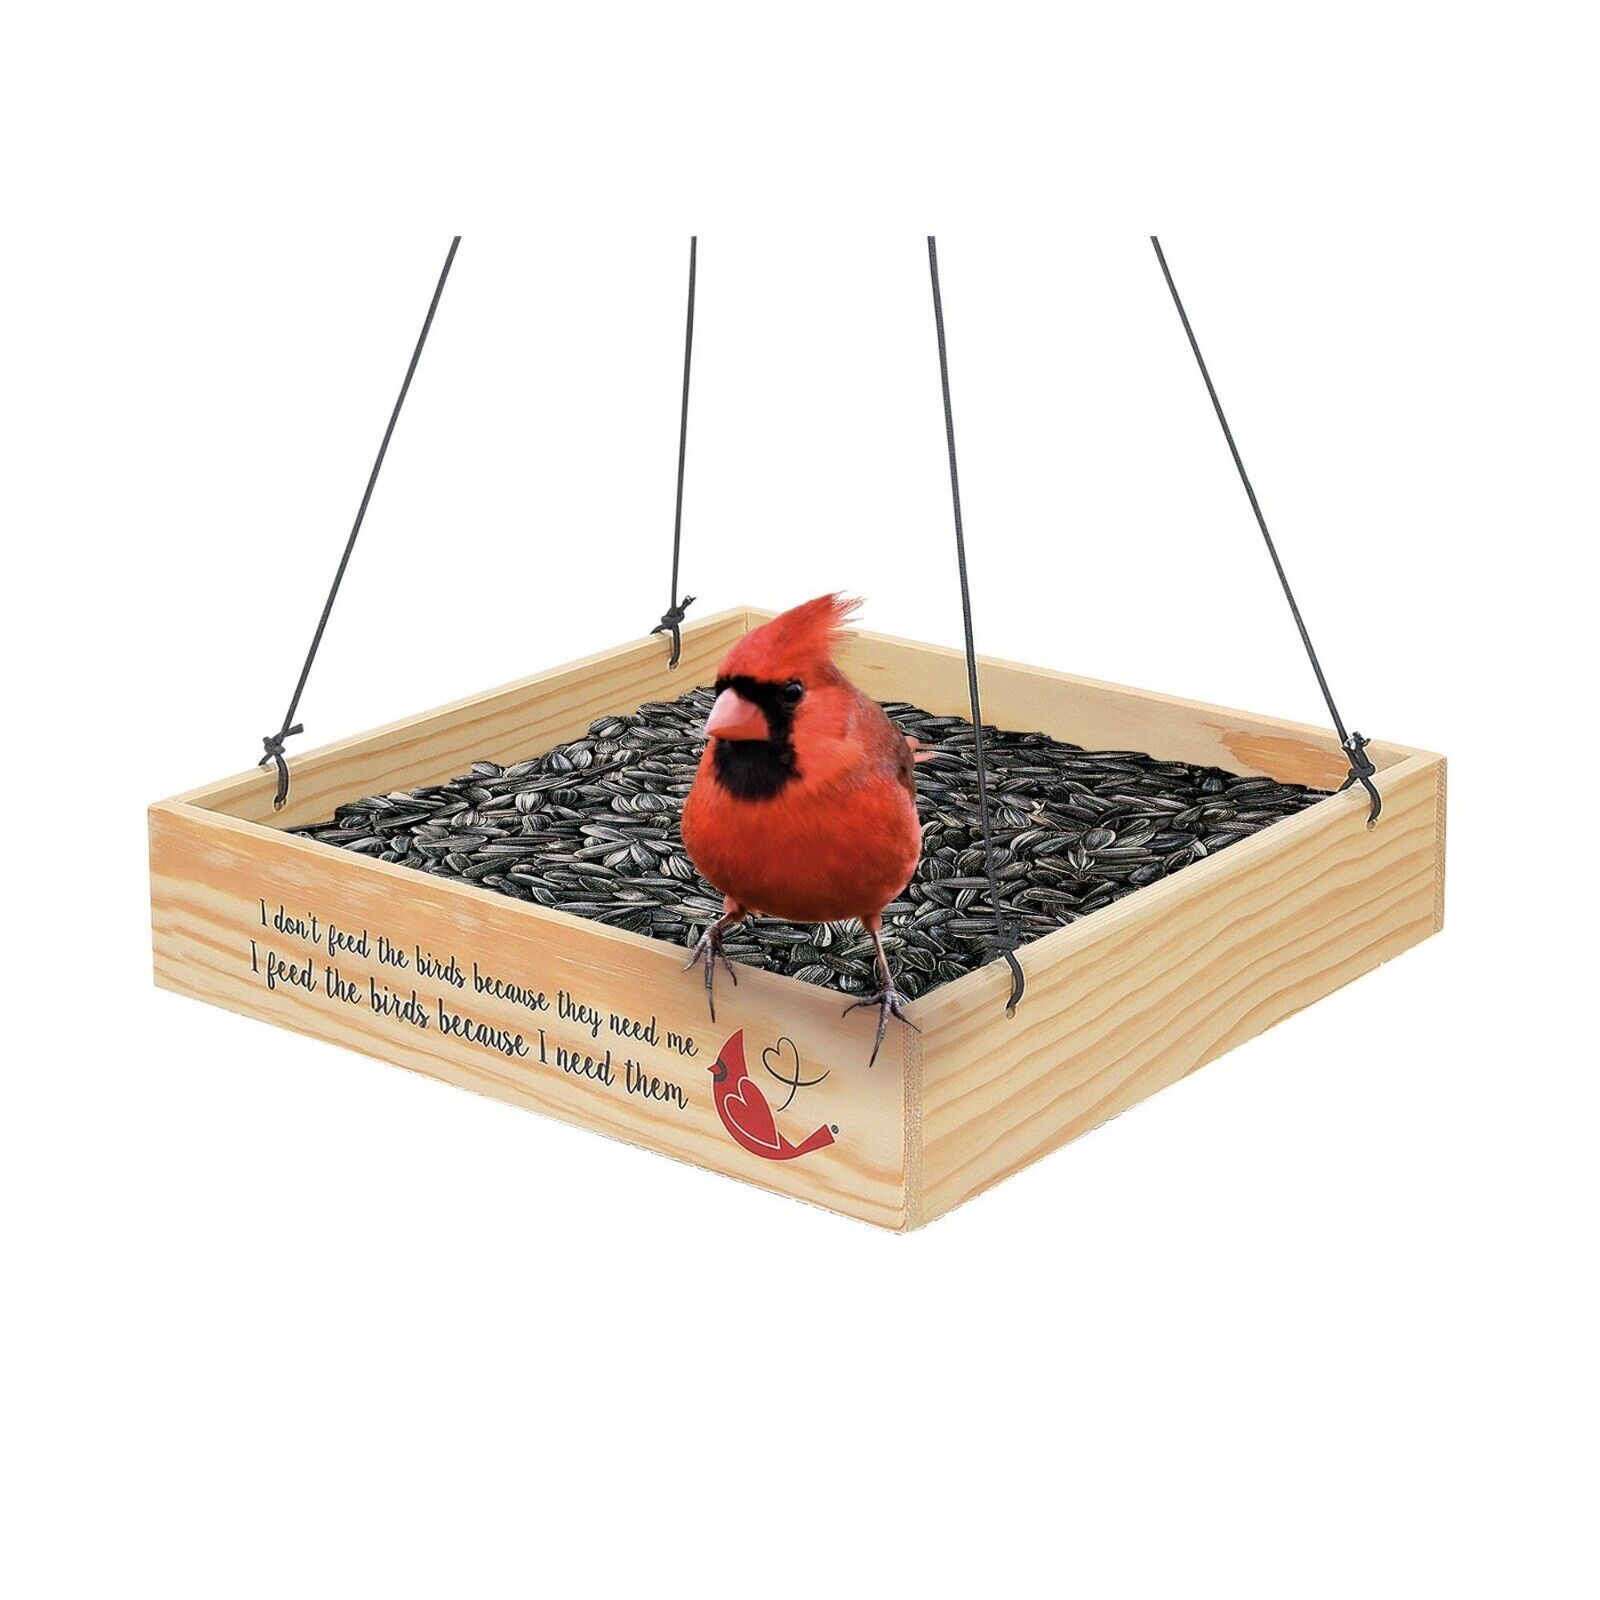 Primary image for Cardinal Tray Bird Feeder with Sentiment Hanging Wooden 9.8" Square Mesh Bottom